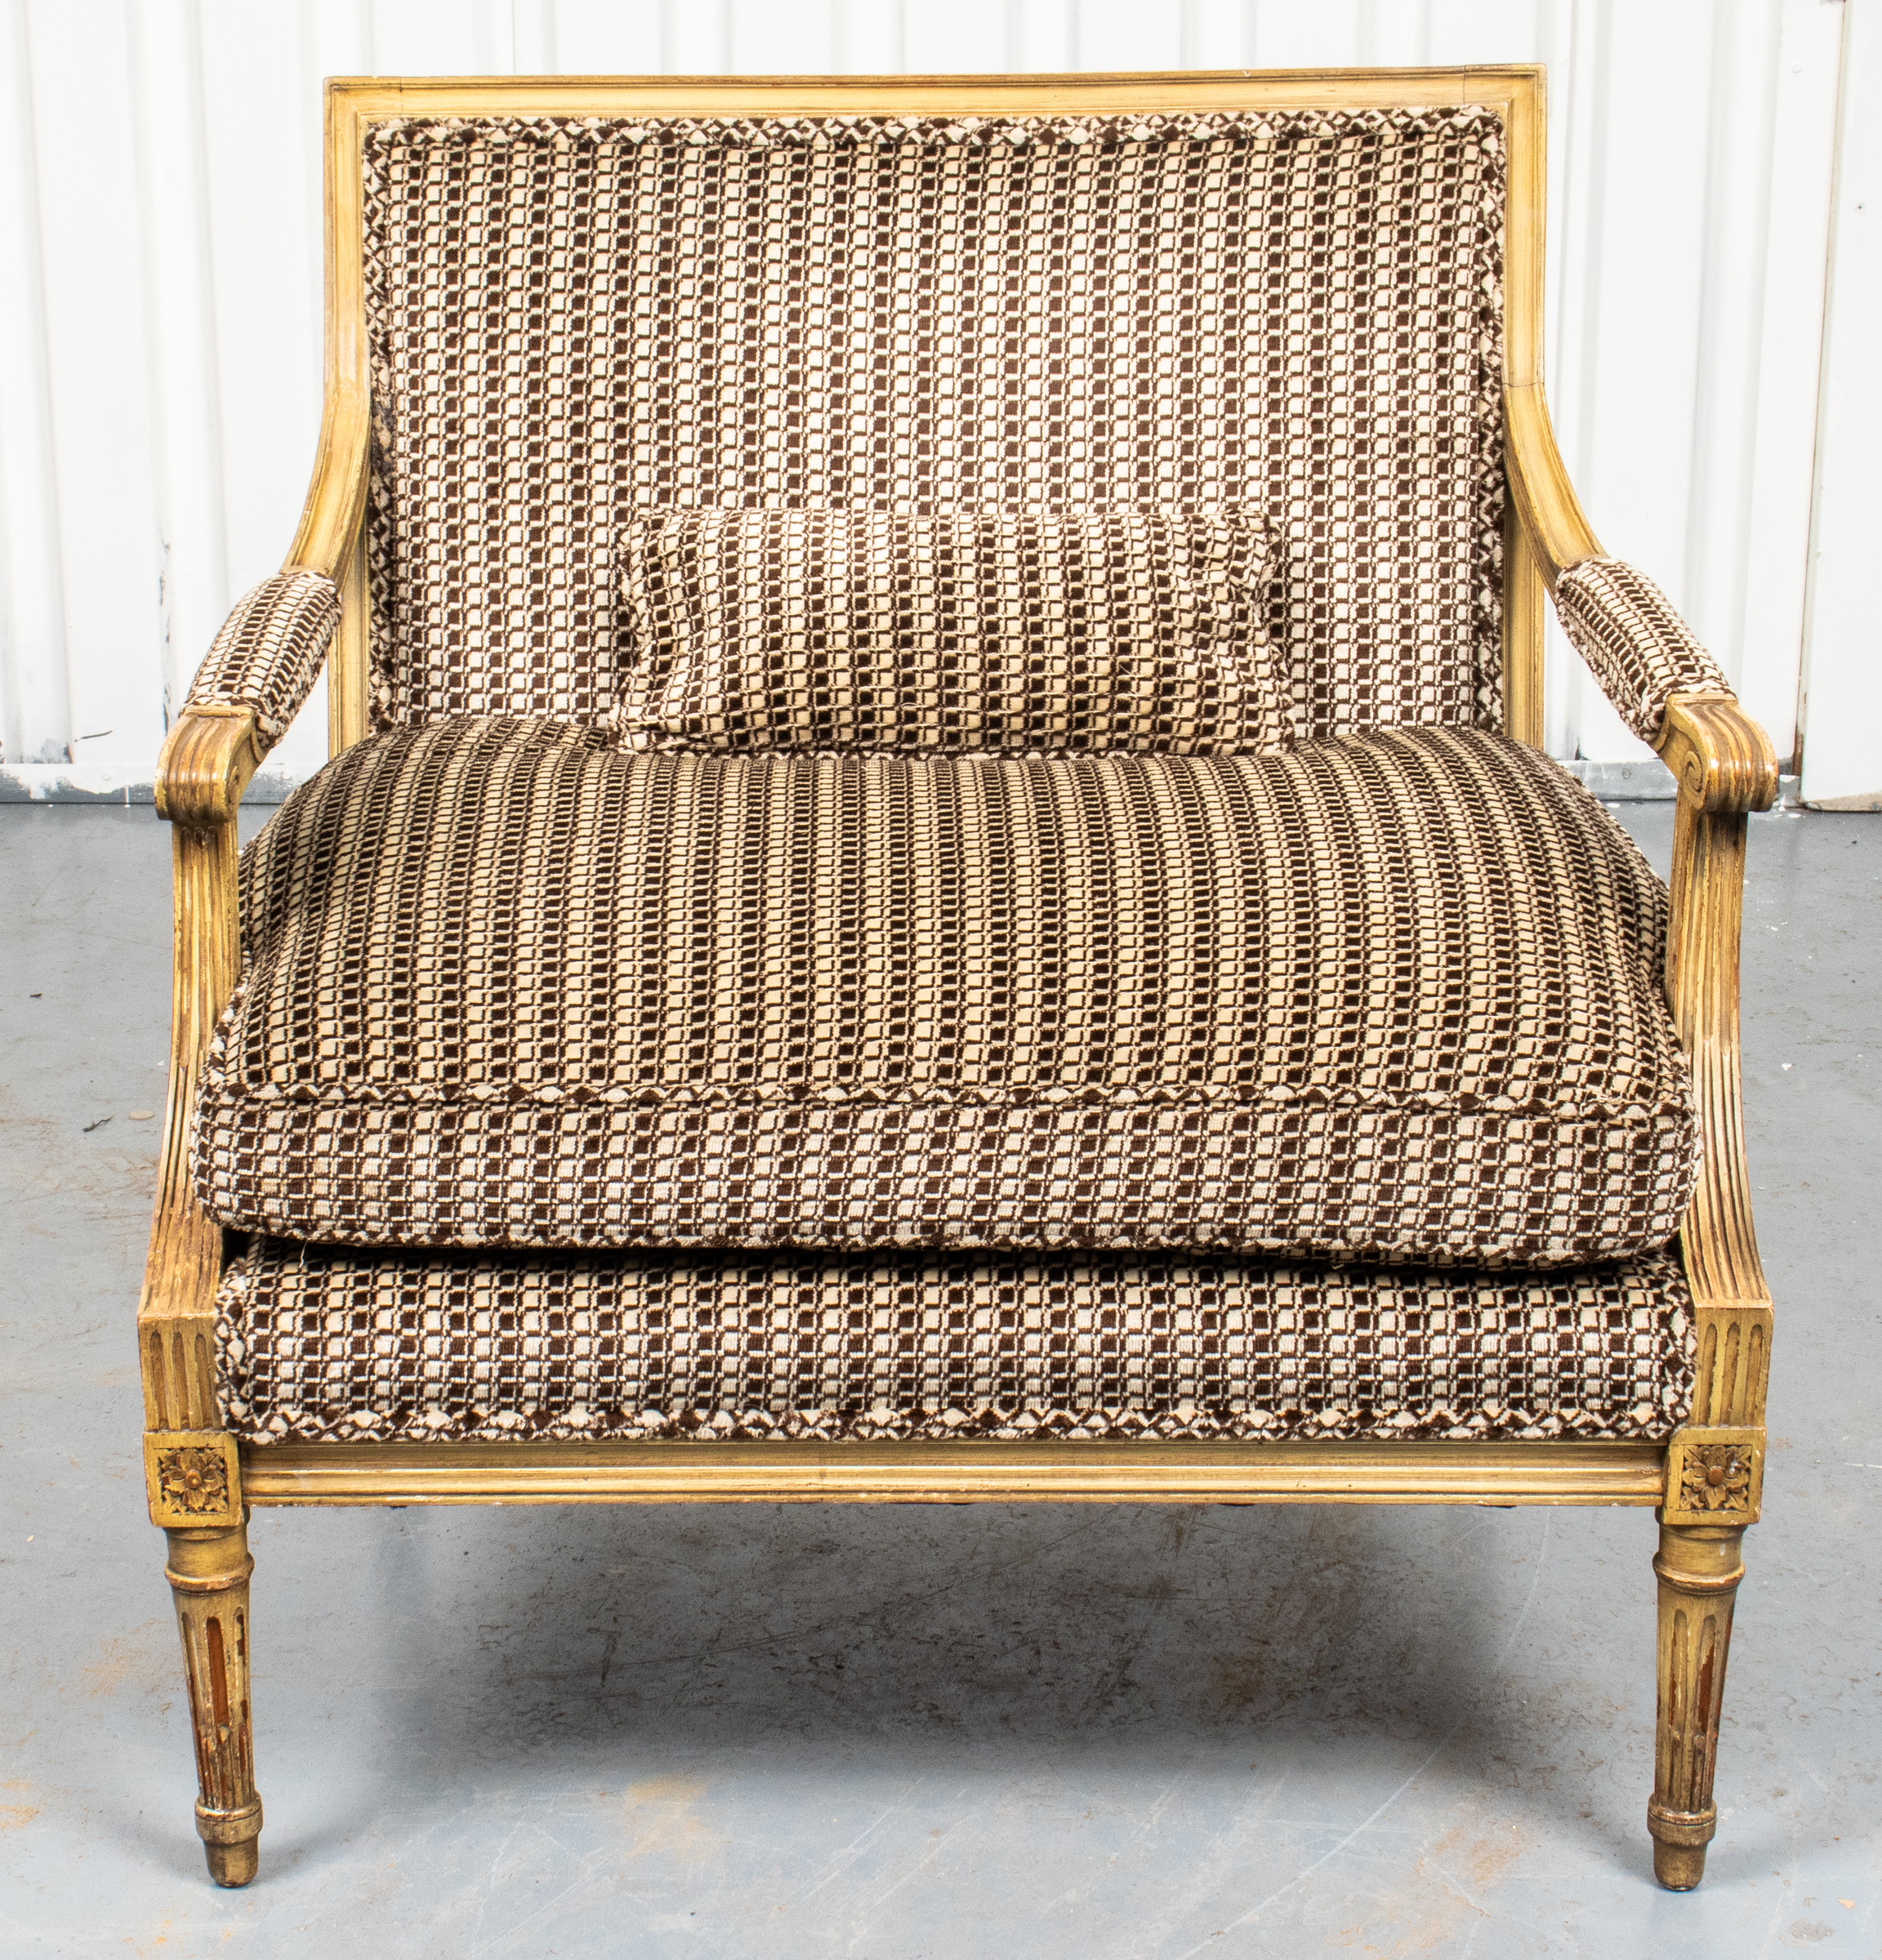 LOUIS XVI STYLE MARQUISE FAUTEUIL